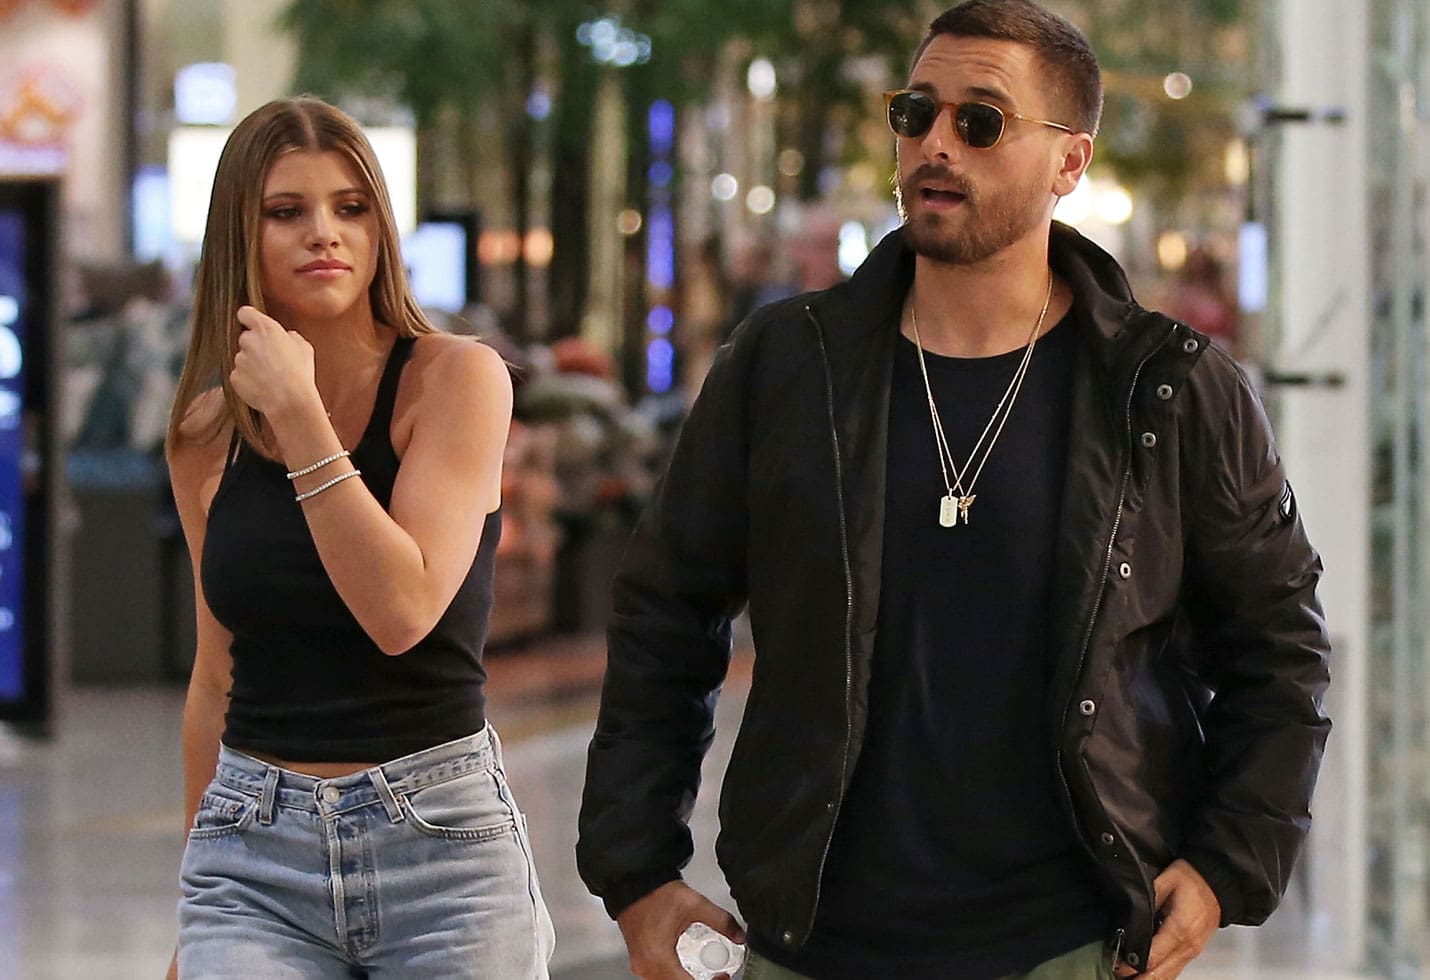 Sofia Richie And Scott Disick Spotted During Romantic Date While Kourtney Kardashian Hangs Out With Mystery Man